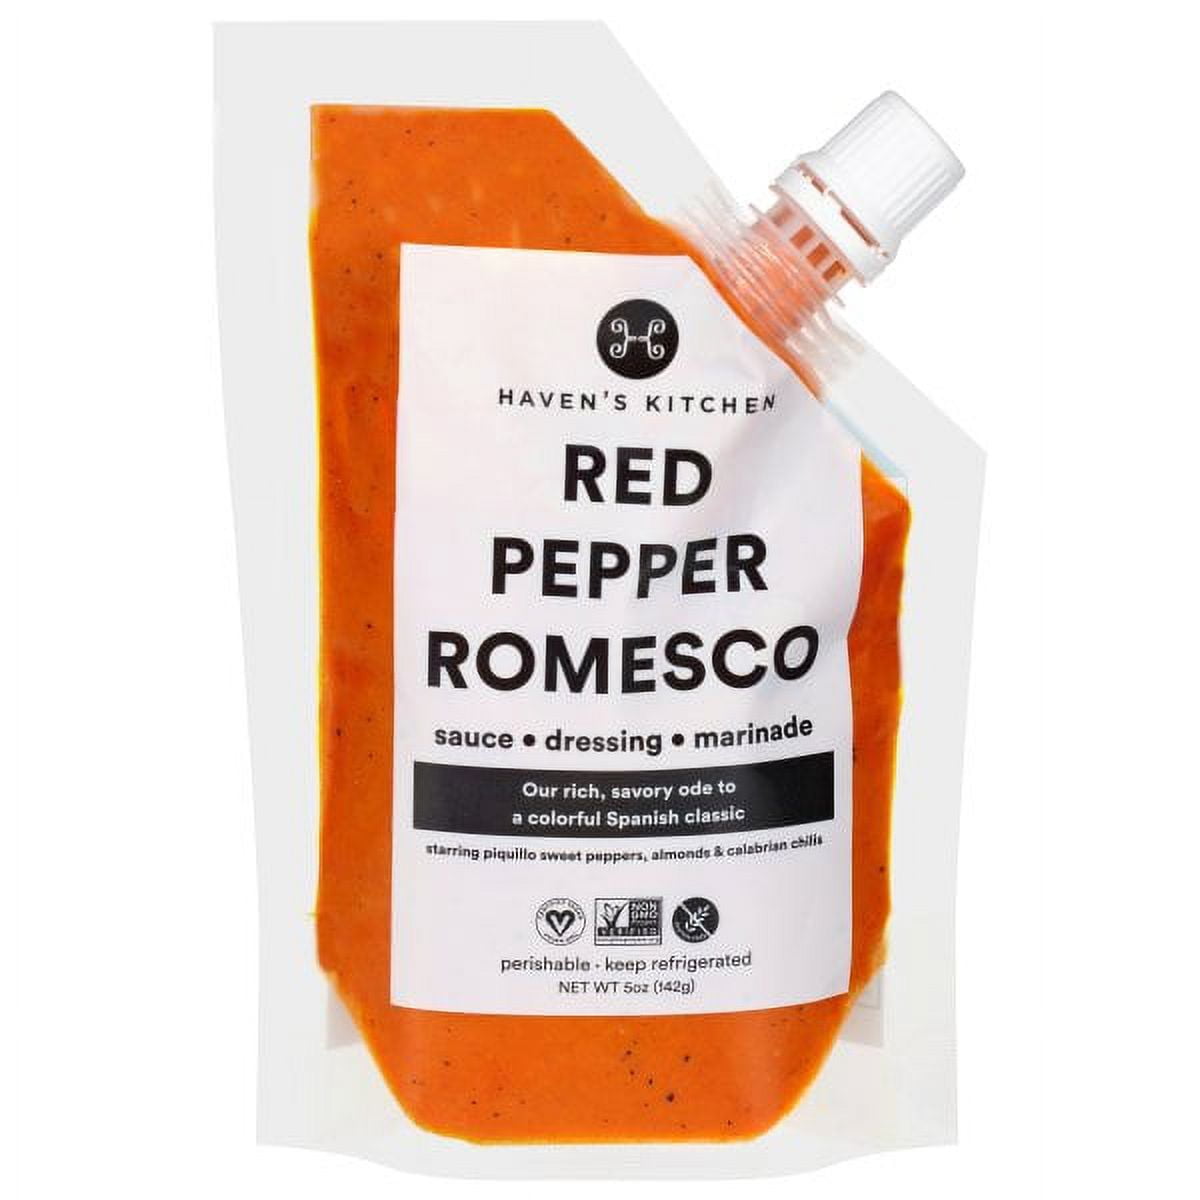 Havens Kitchen Red Pepper Romesco Sauce, 5 Ounce Pouch -- 6 per case. 